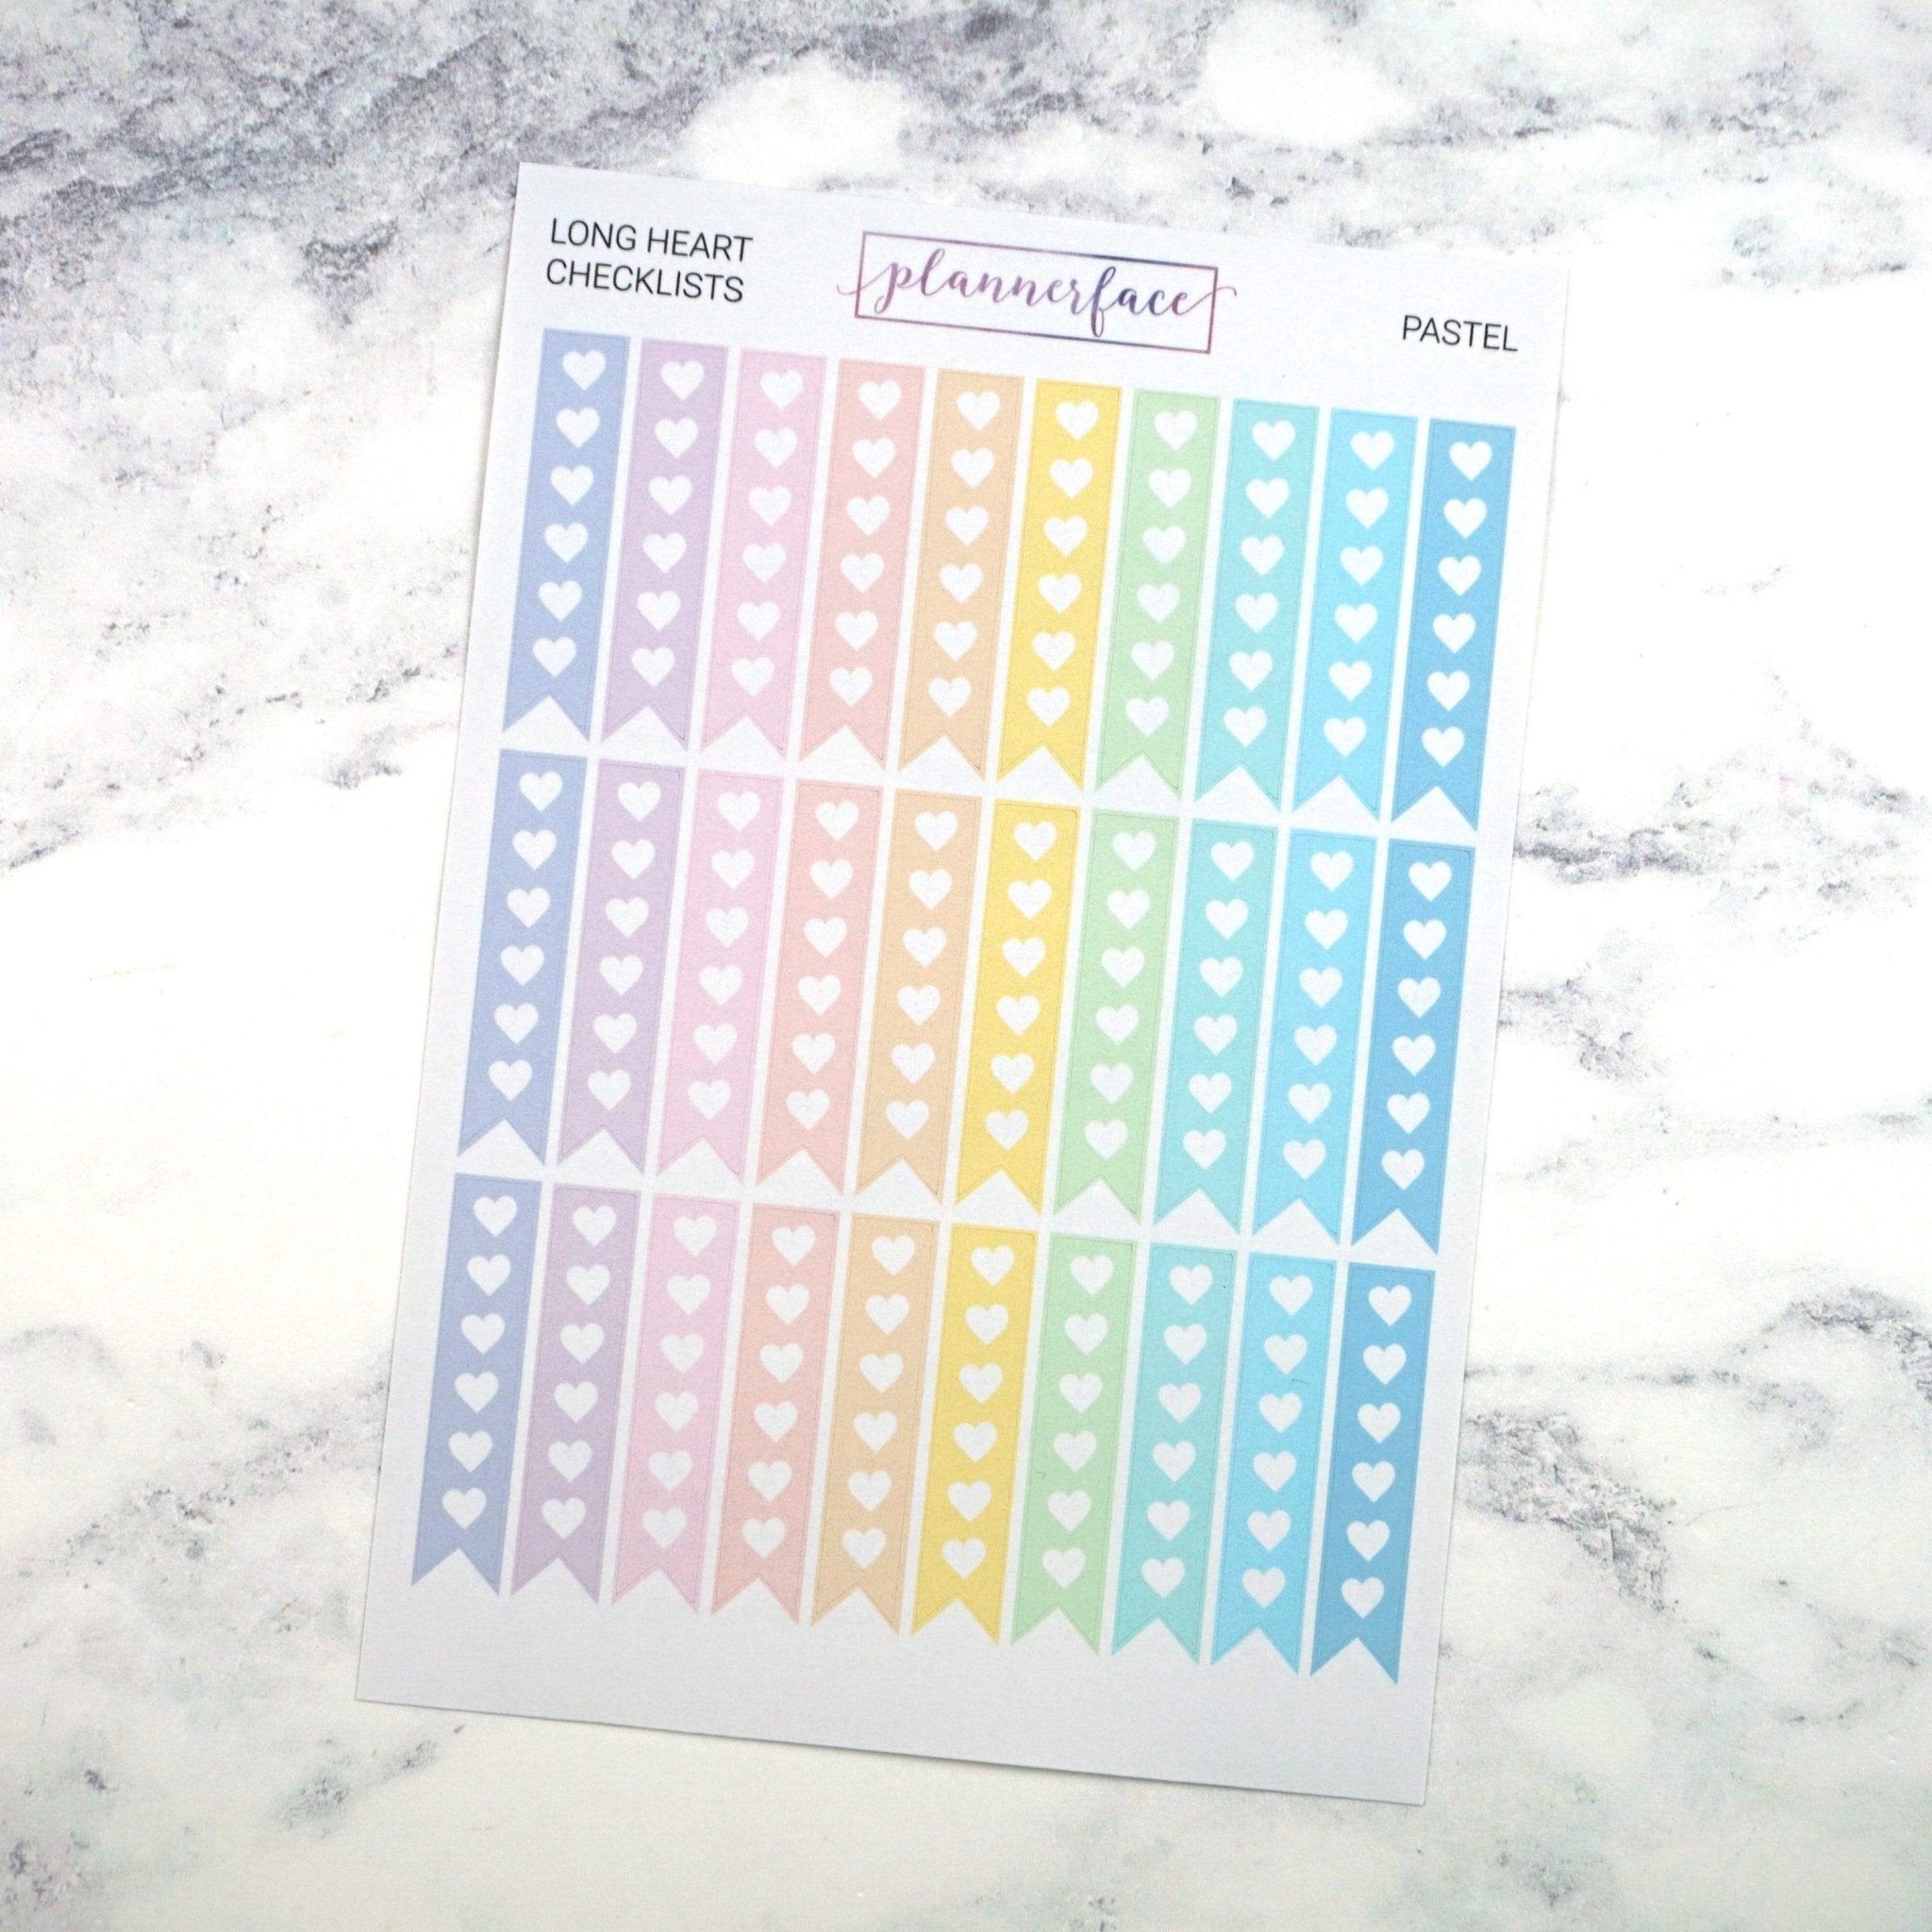 Heart Checklists - LONG | Multicolour Pastel by Plannerface